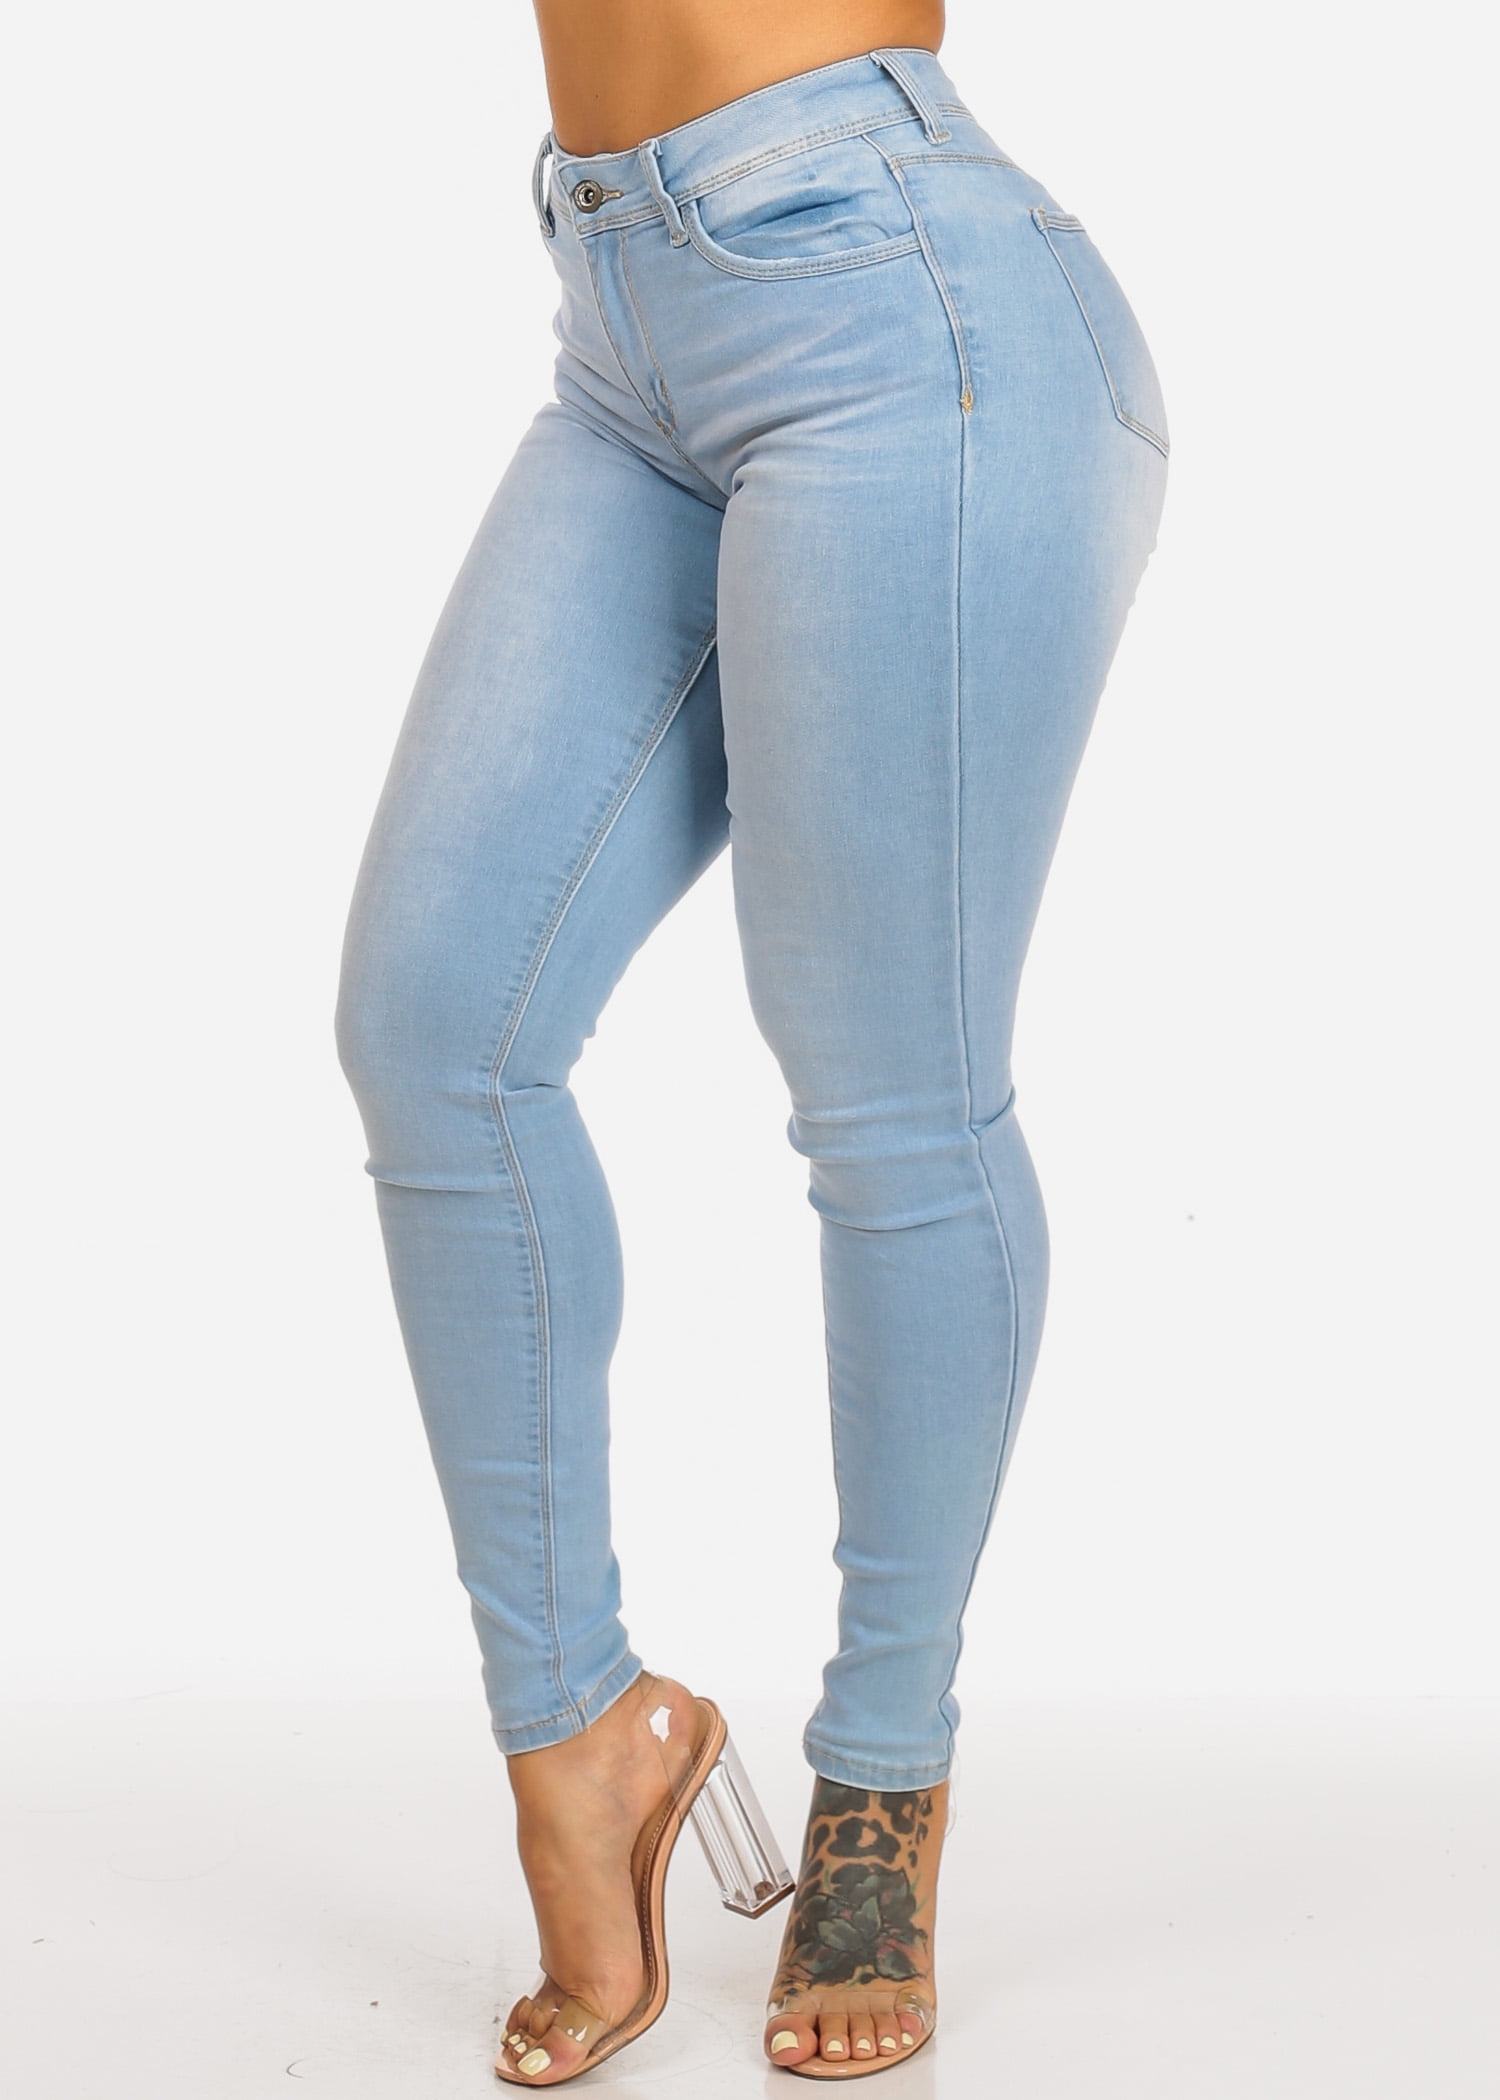 light wash jeans womens